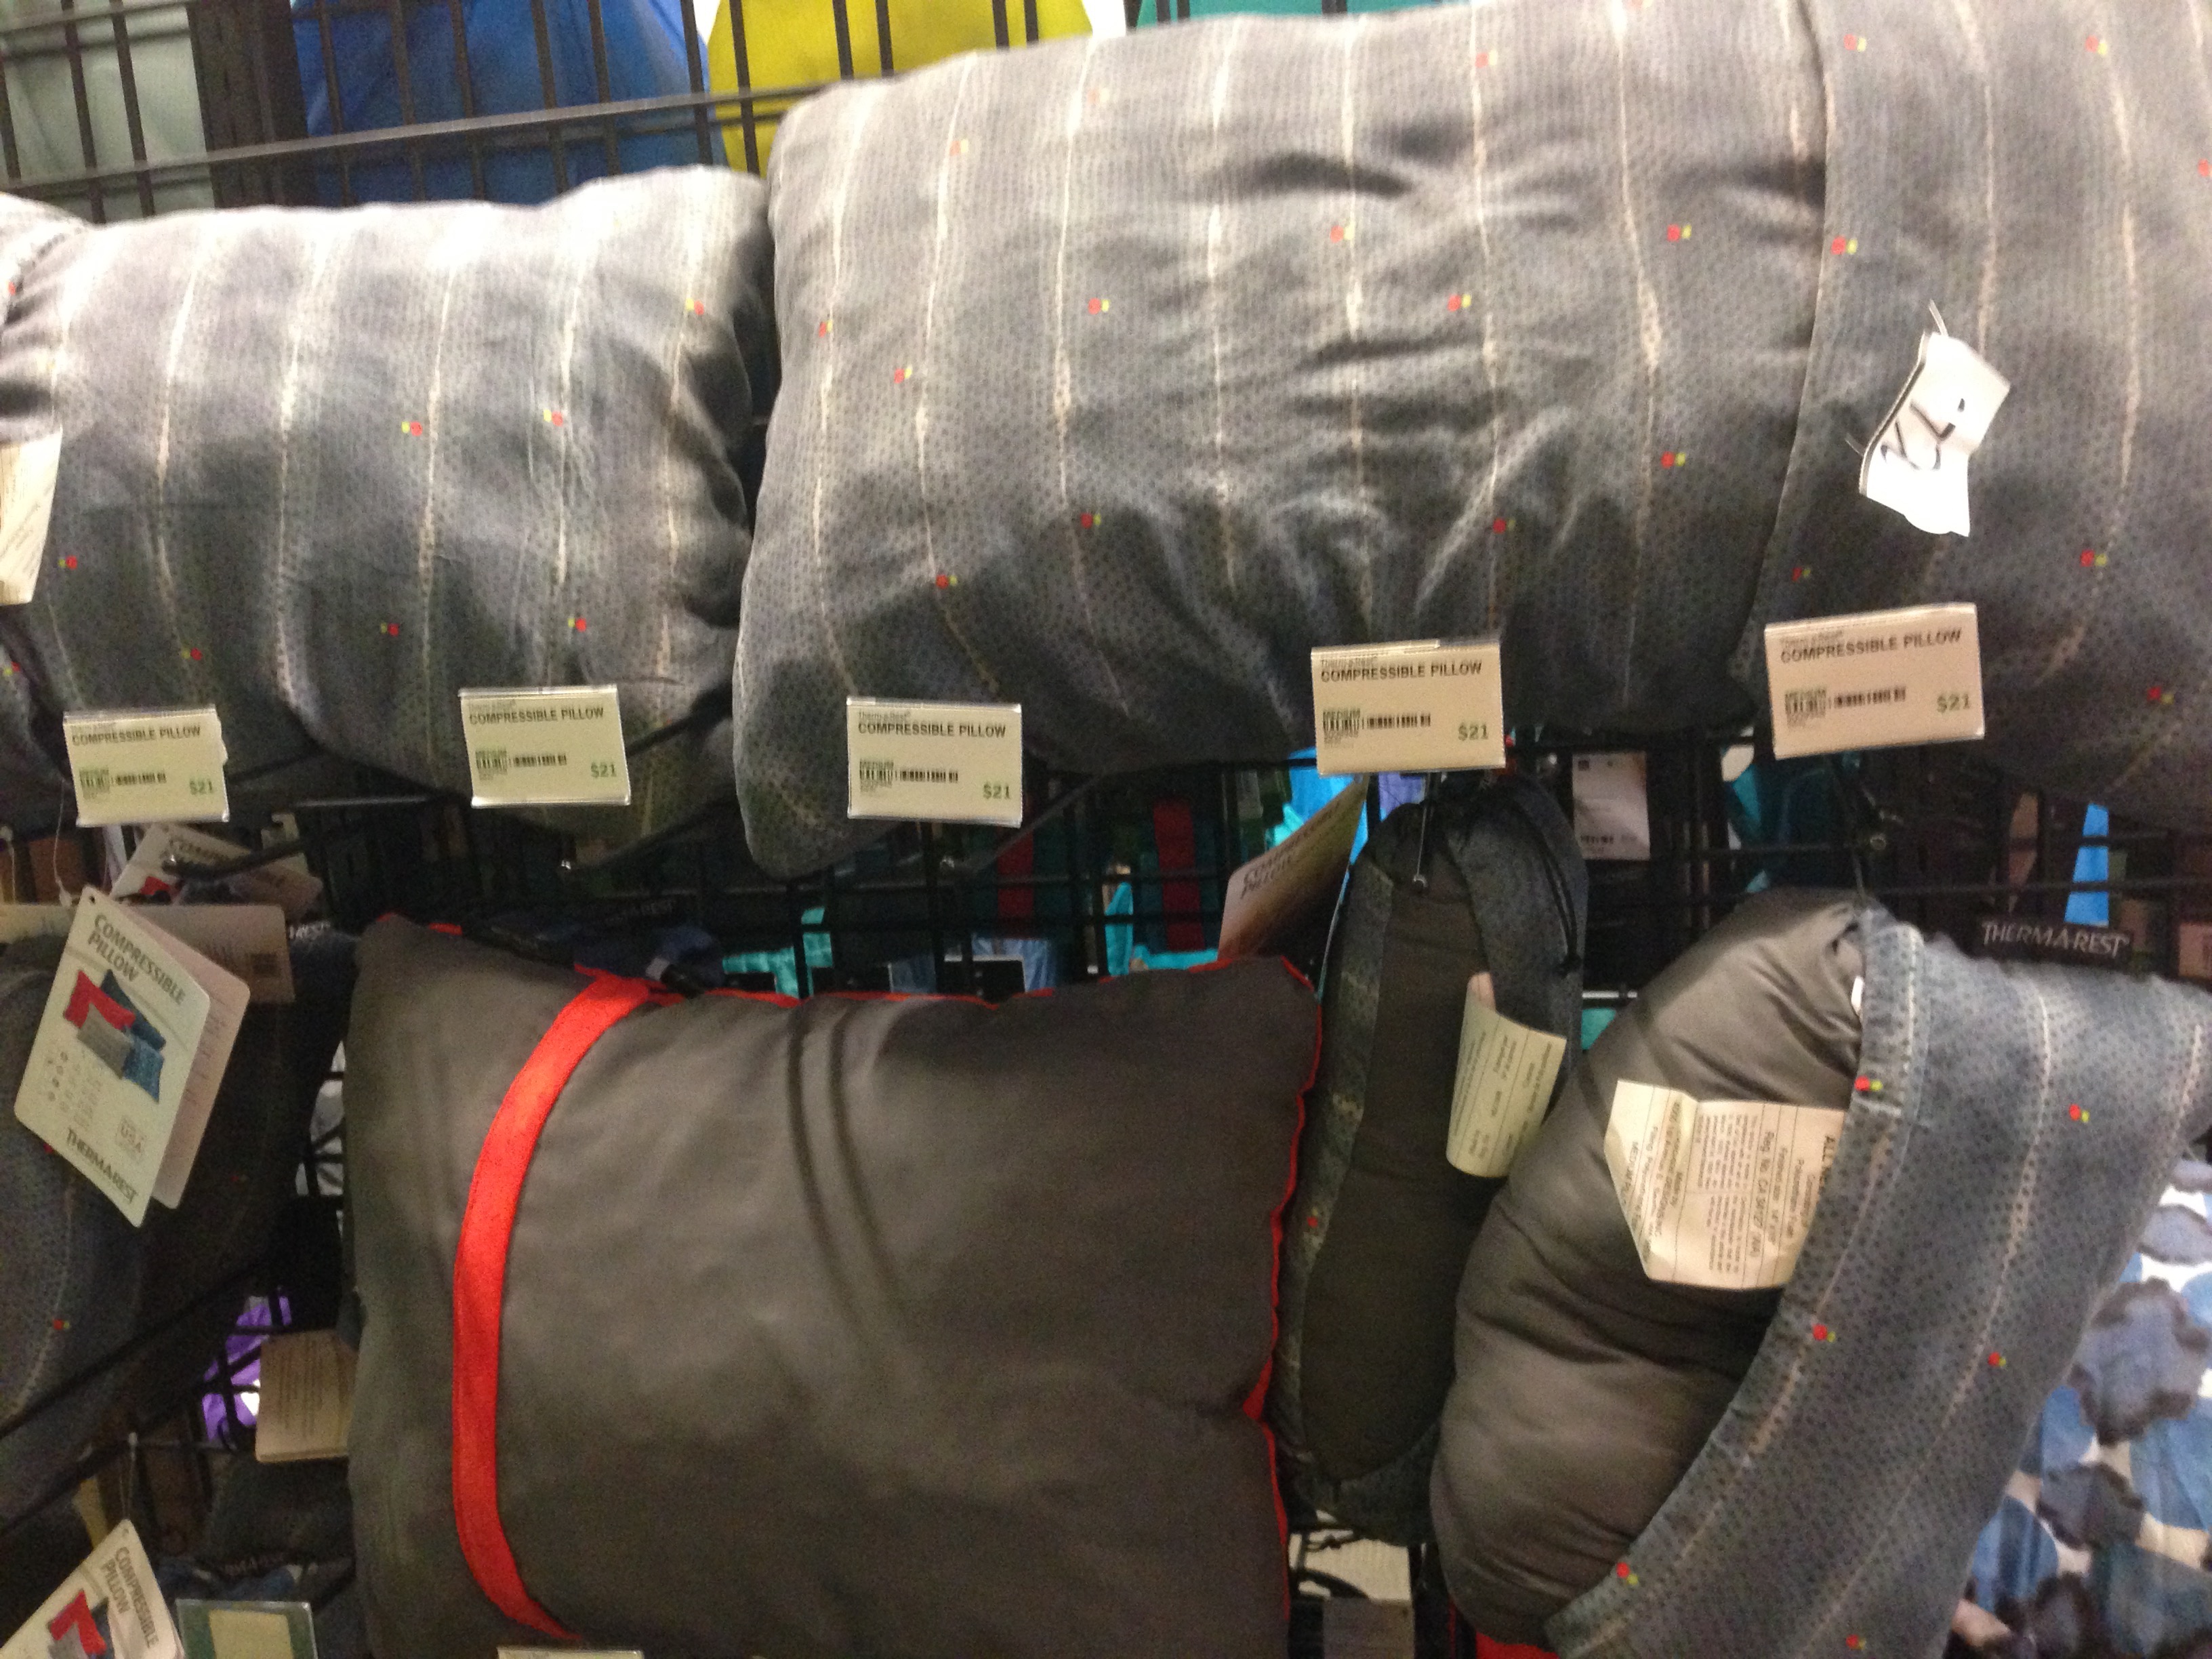 Inflatable pillows!  Okay in a pinch, but if space isn't critical, I would use a real one.